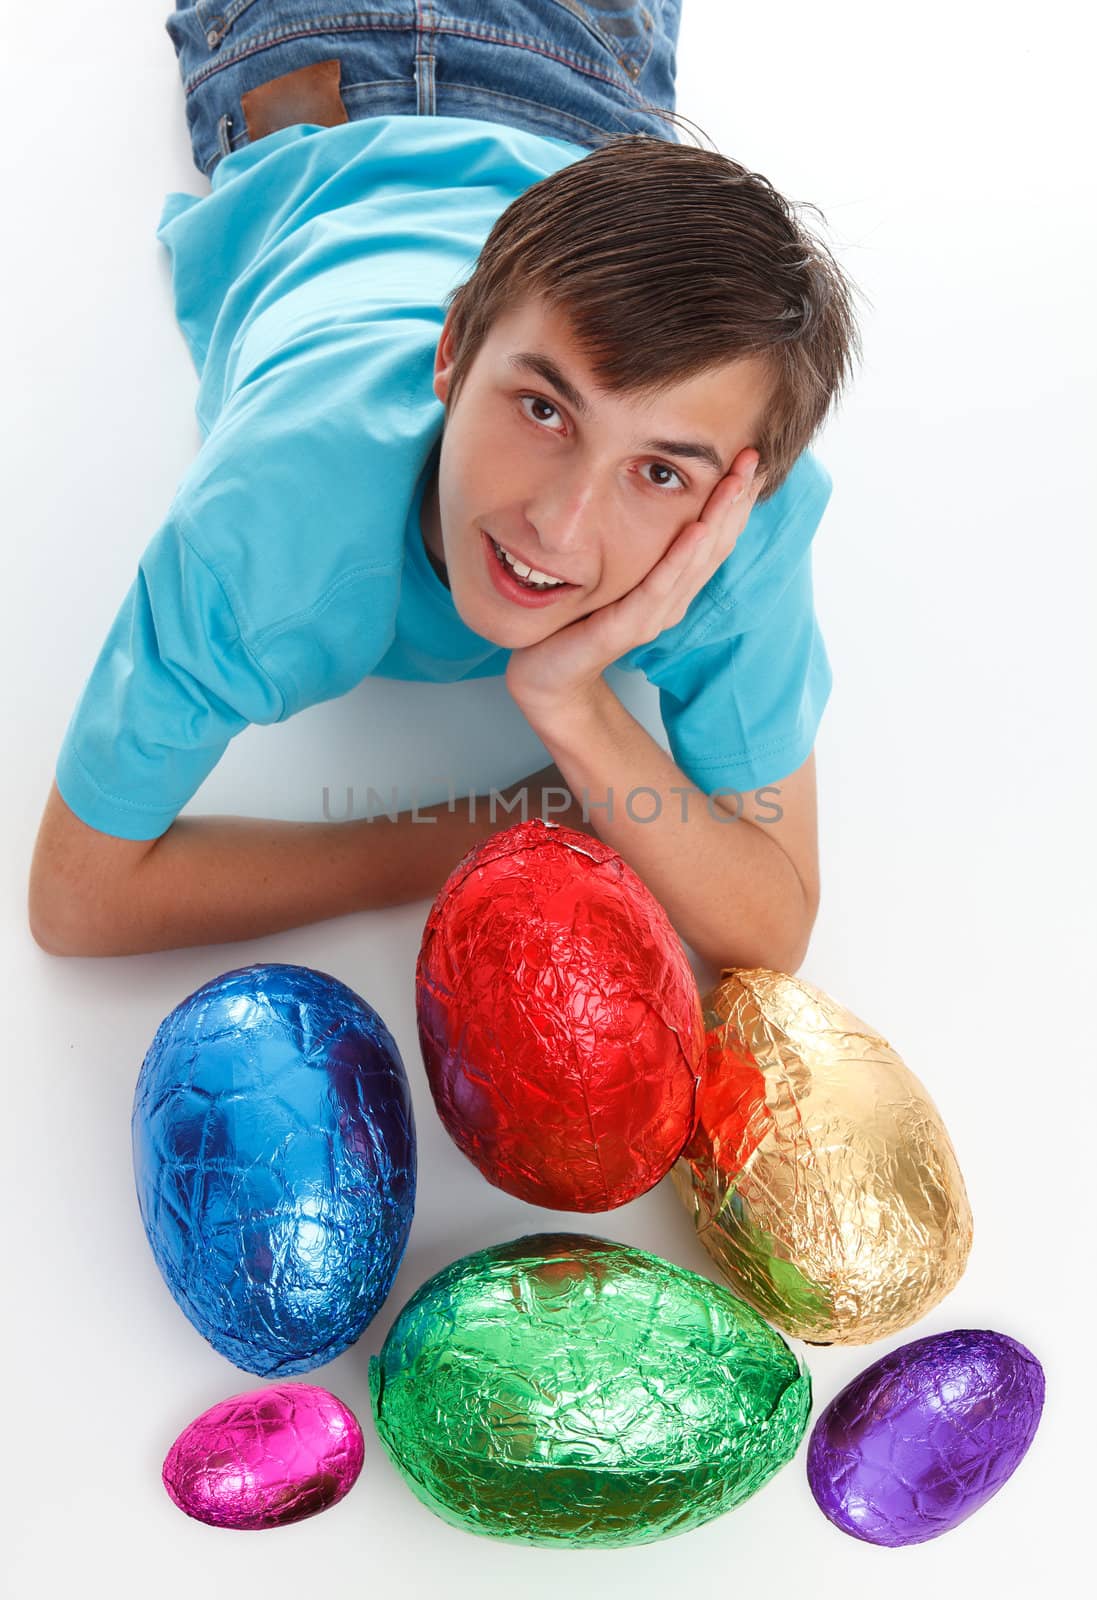 Smiling boy among a small selection of colourful easter eggs.